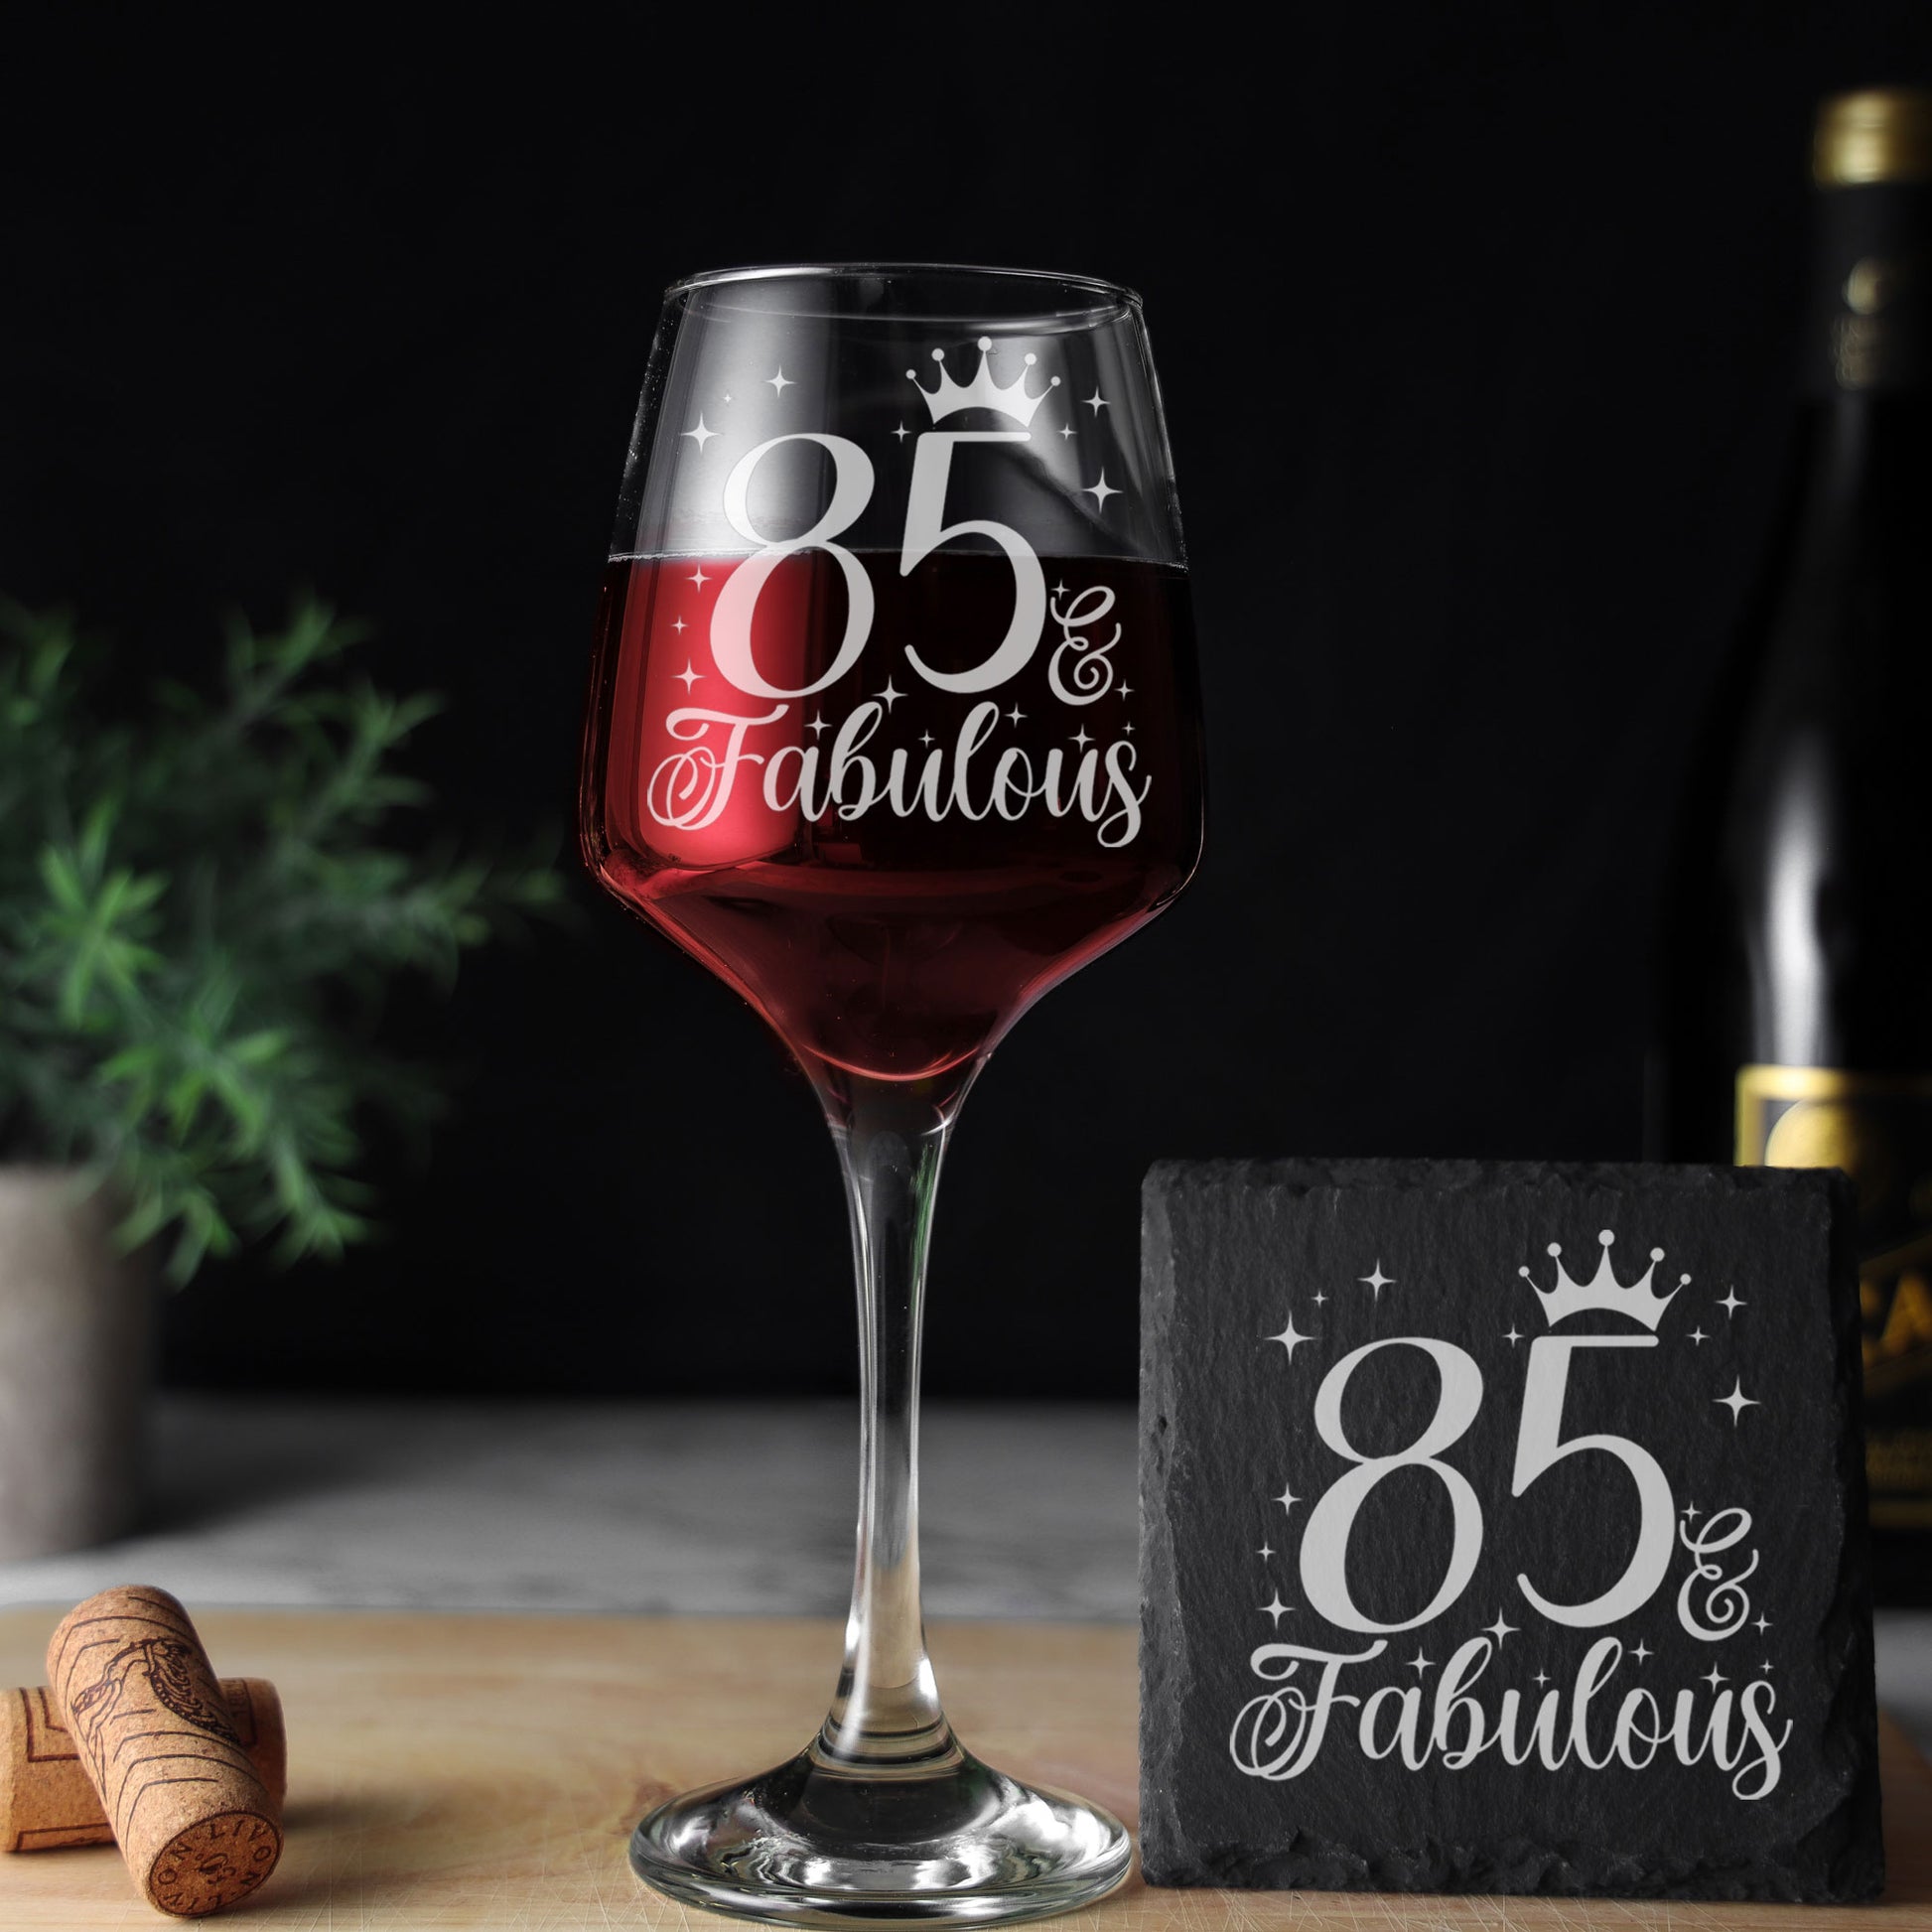 85 & Fabulous 85th Birthday Gift Engraved Wine Glass and/or Coaster Set  - Always Looking Good - Glass & Square Coaster  